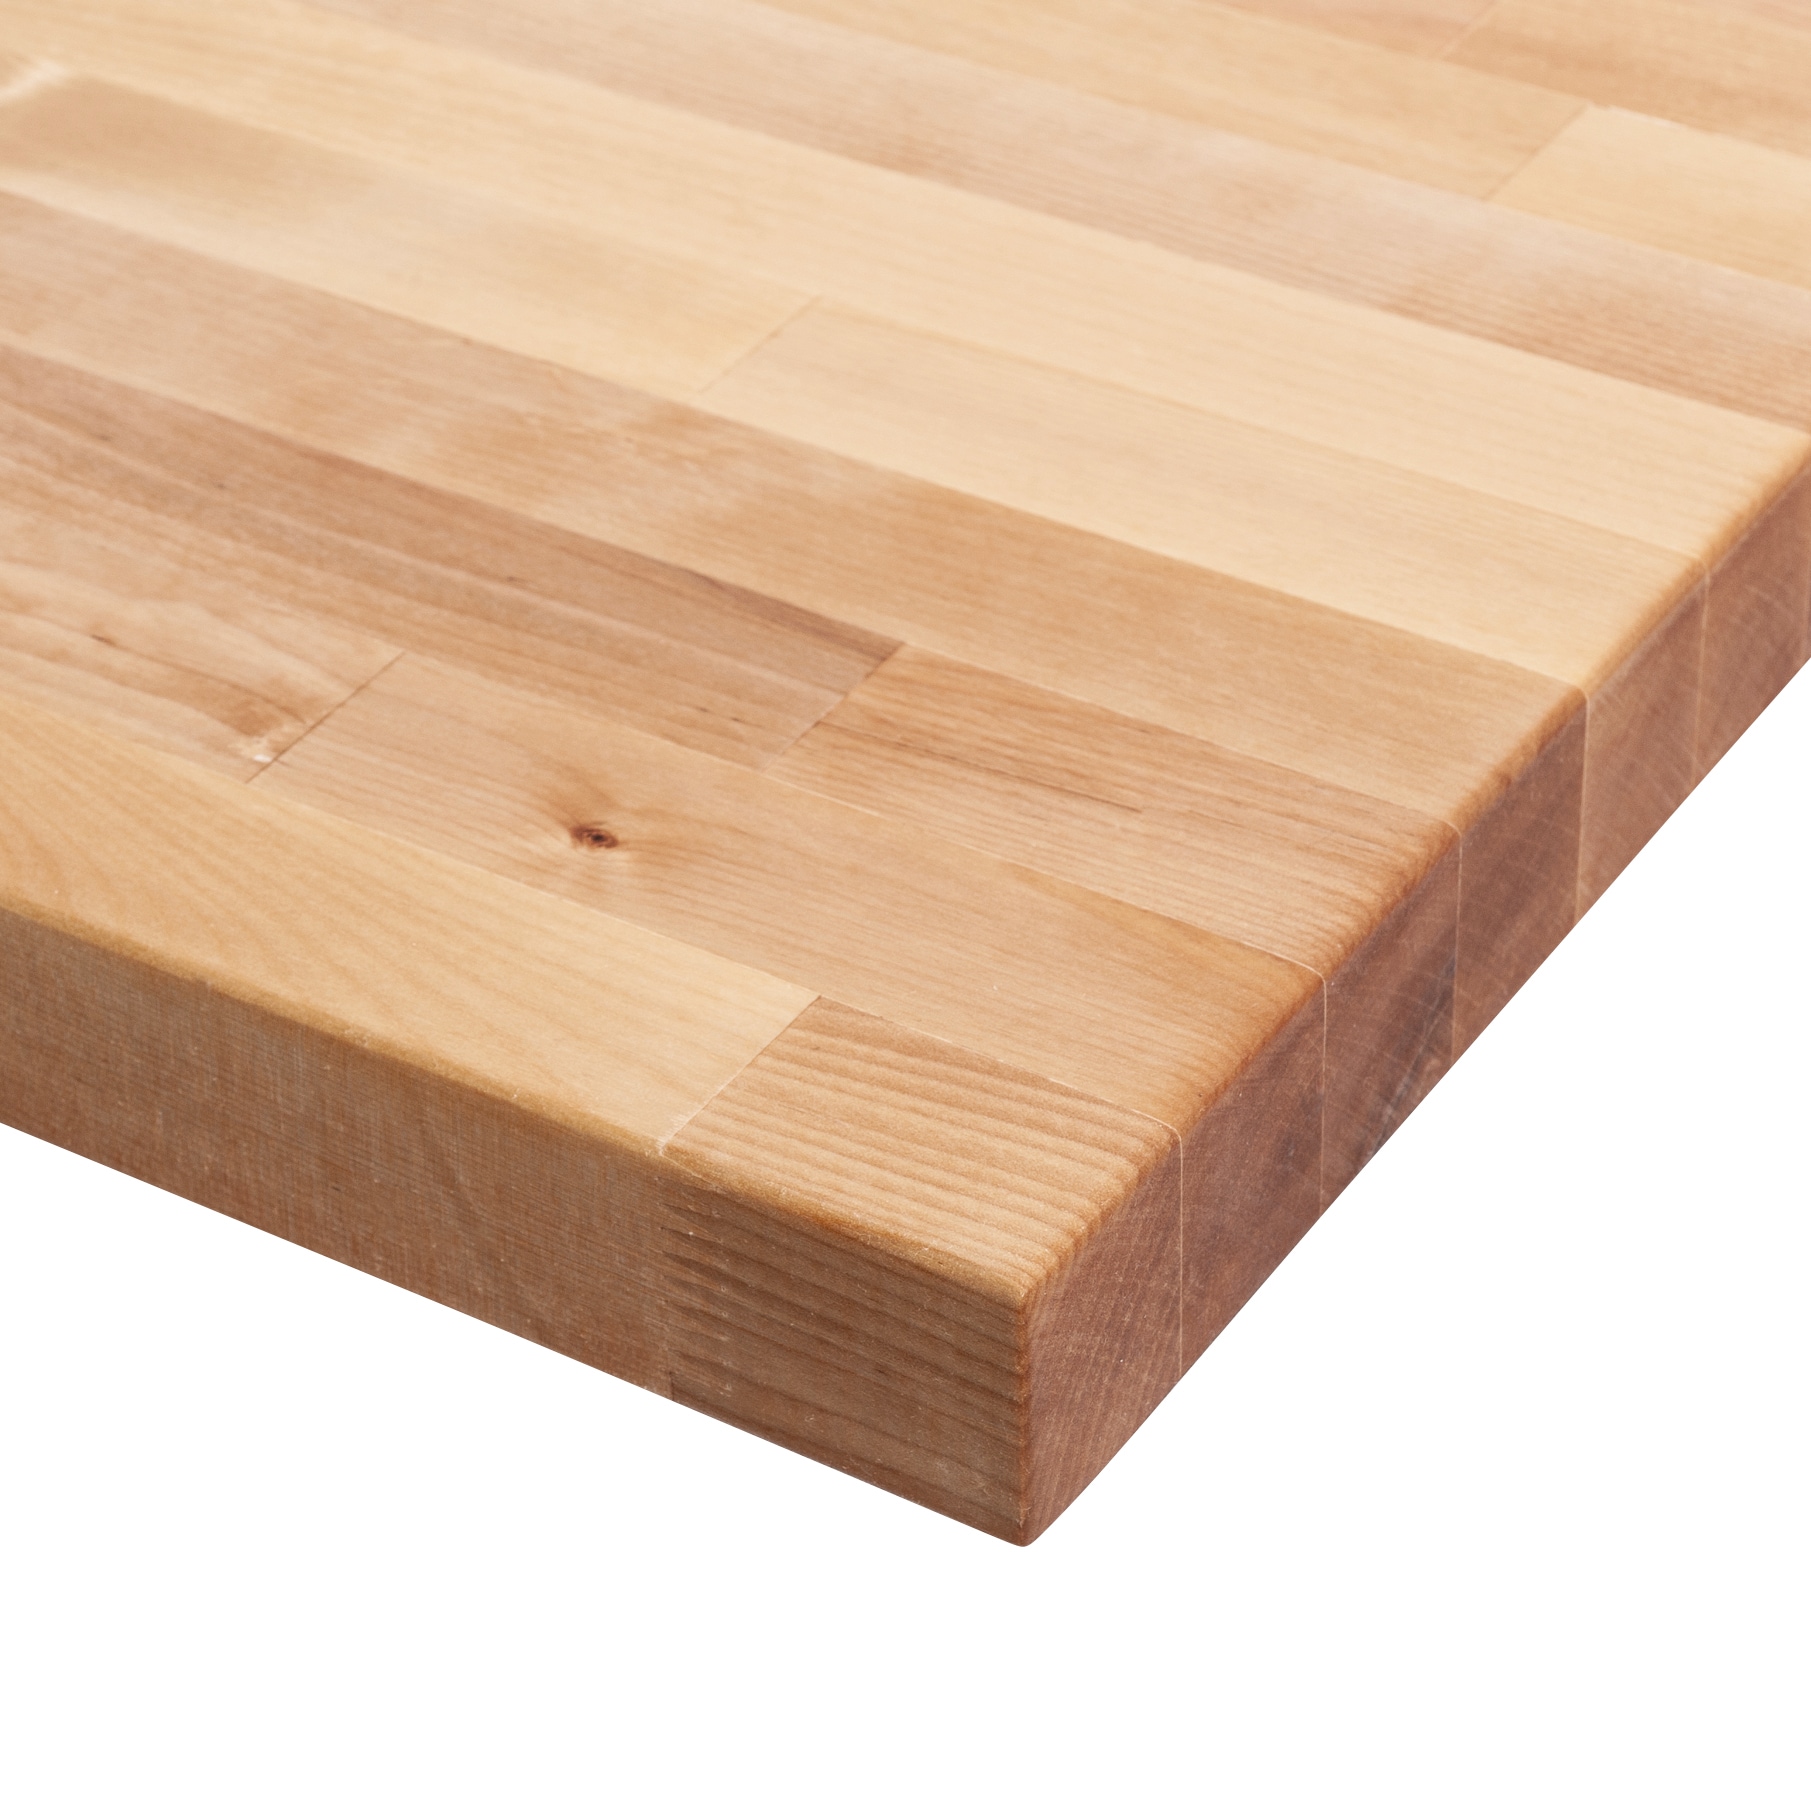 The Baltic Butcher Block Birch 72-in x 39-in x 1.75-in Unfinished